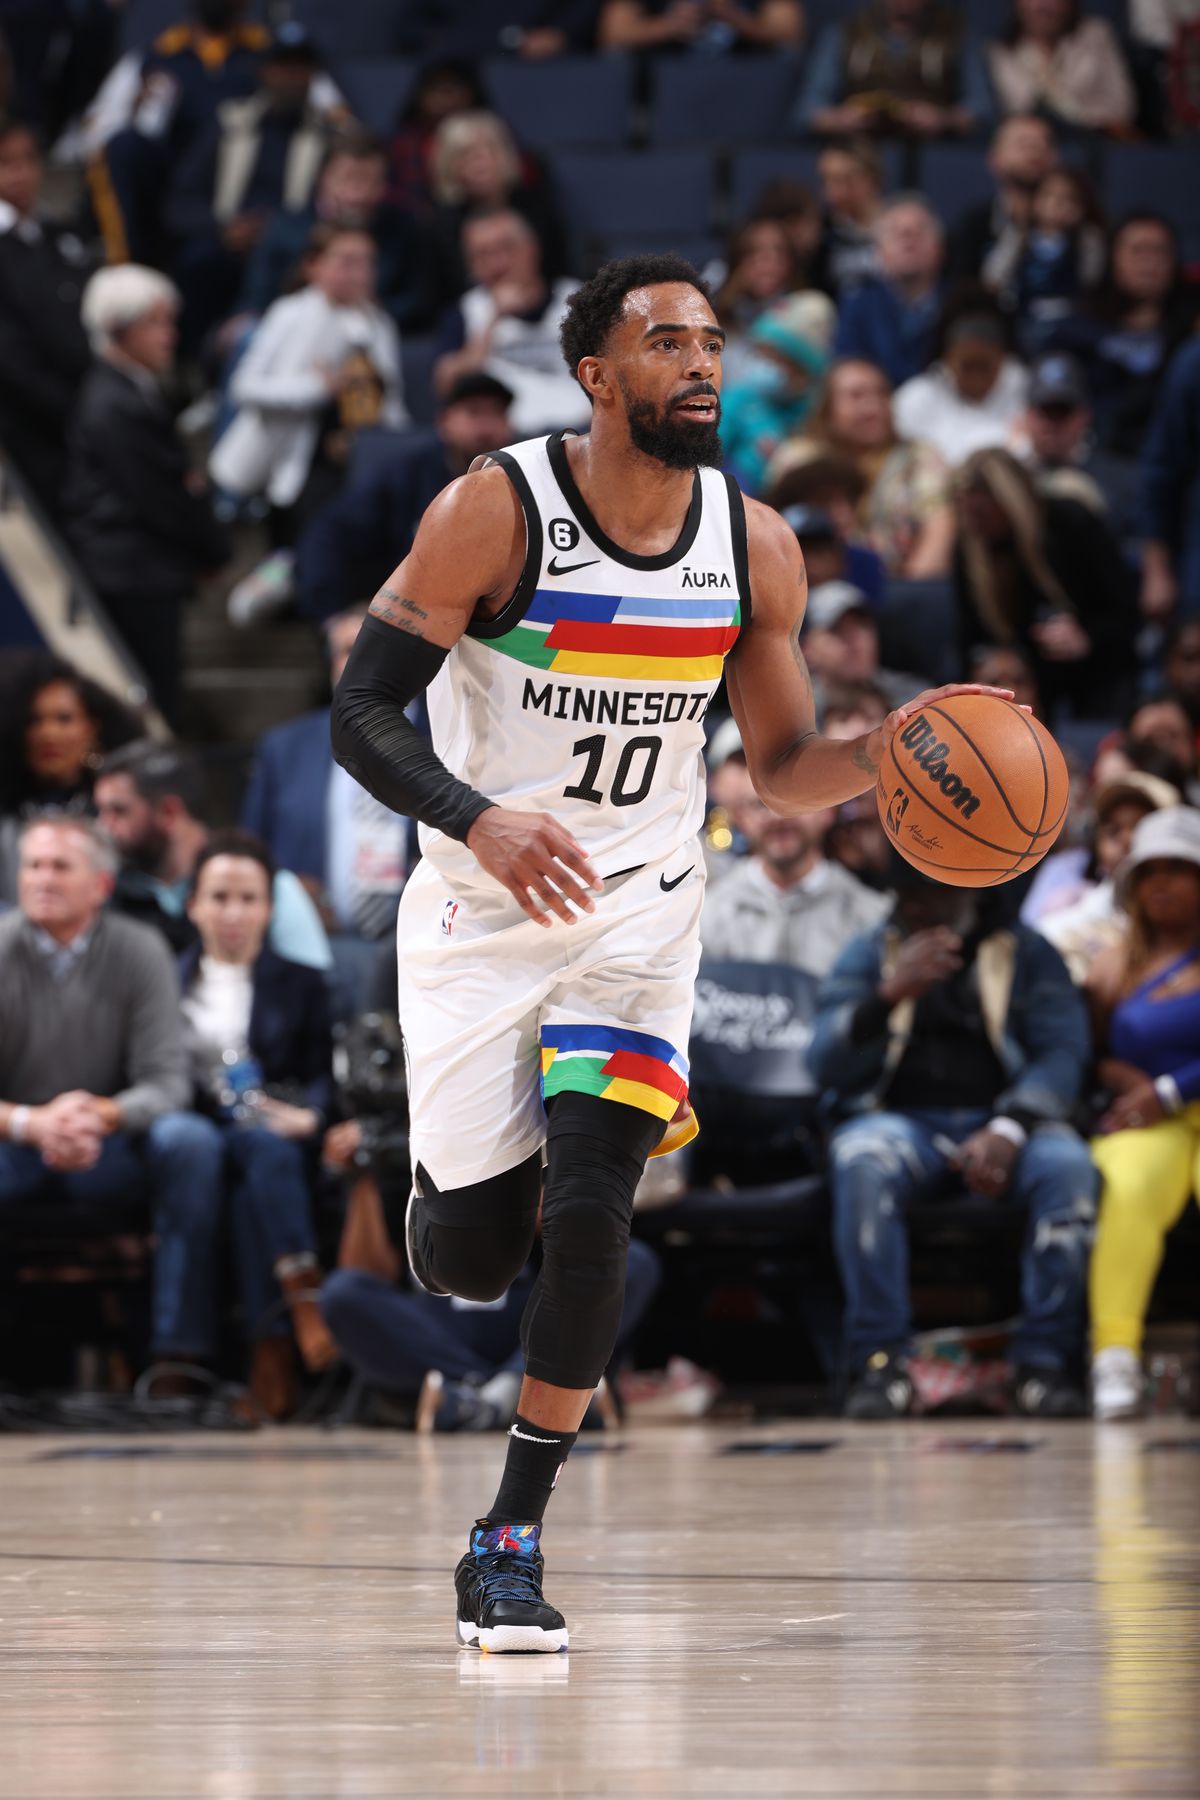 mike conley timberwolves